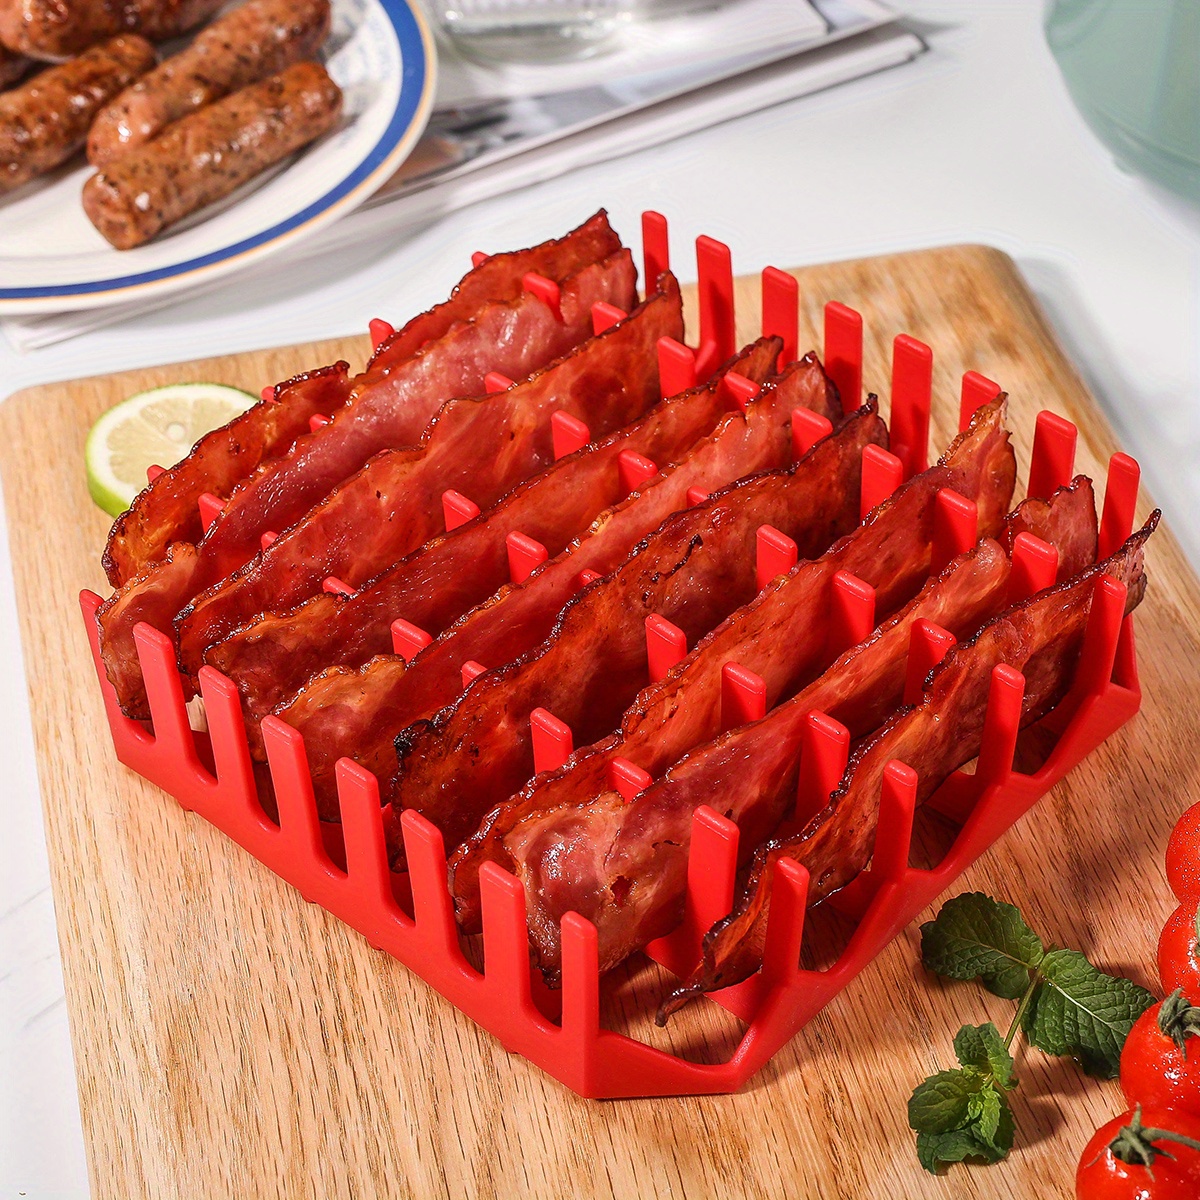 1pc Red Square Silicone Air Fryer Grill, Hot Dog Rack, Bacon Rack, High  Temperature Resistance, BPA Free, Easy To Operate, Easy To Clean,  Dishwasher S